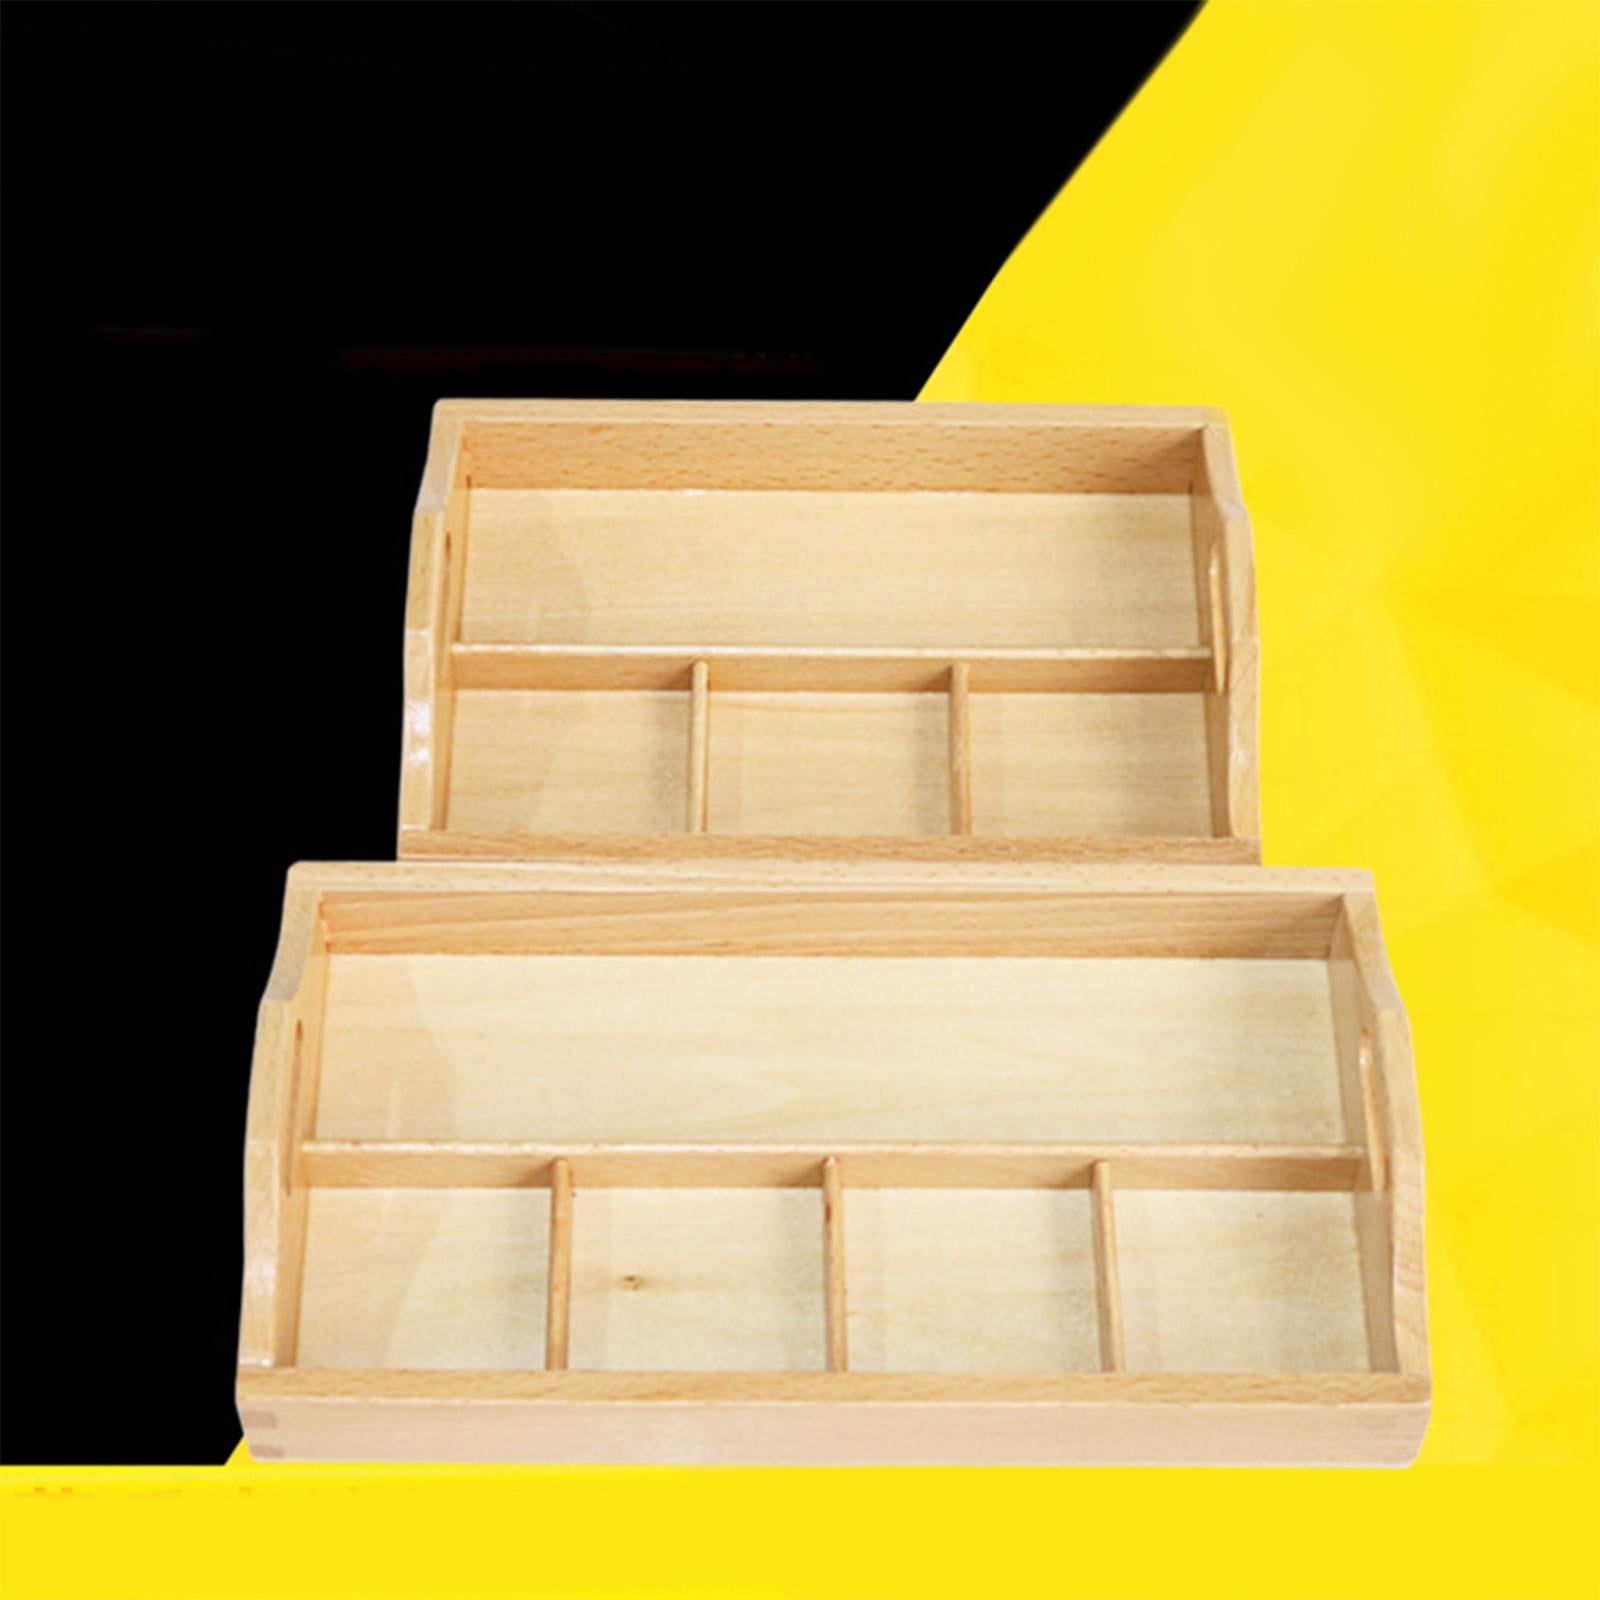 Montessori Trays, Wooden Sorting trays for Kids